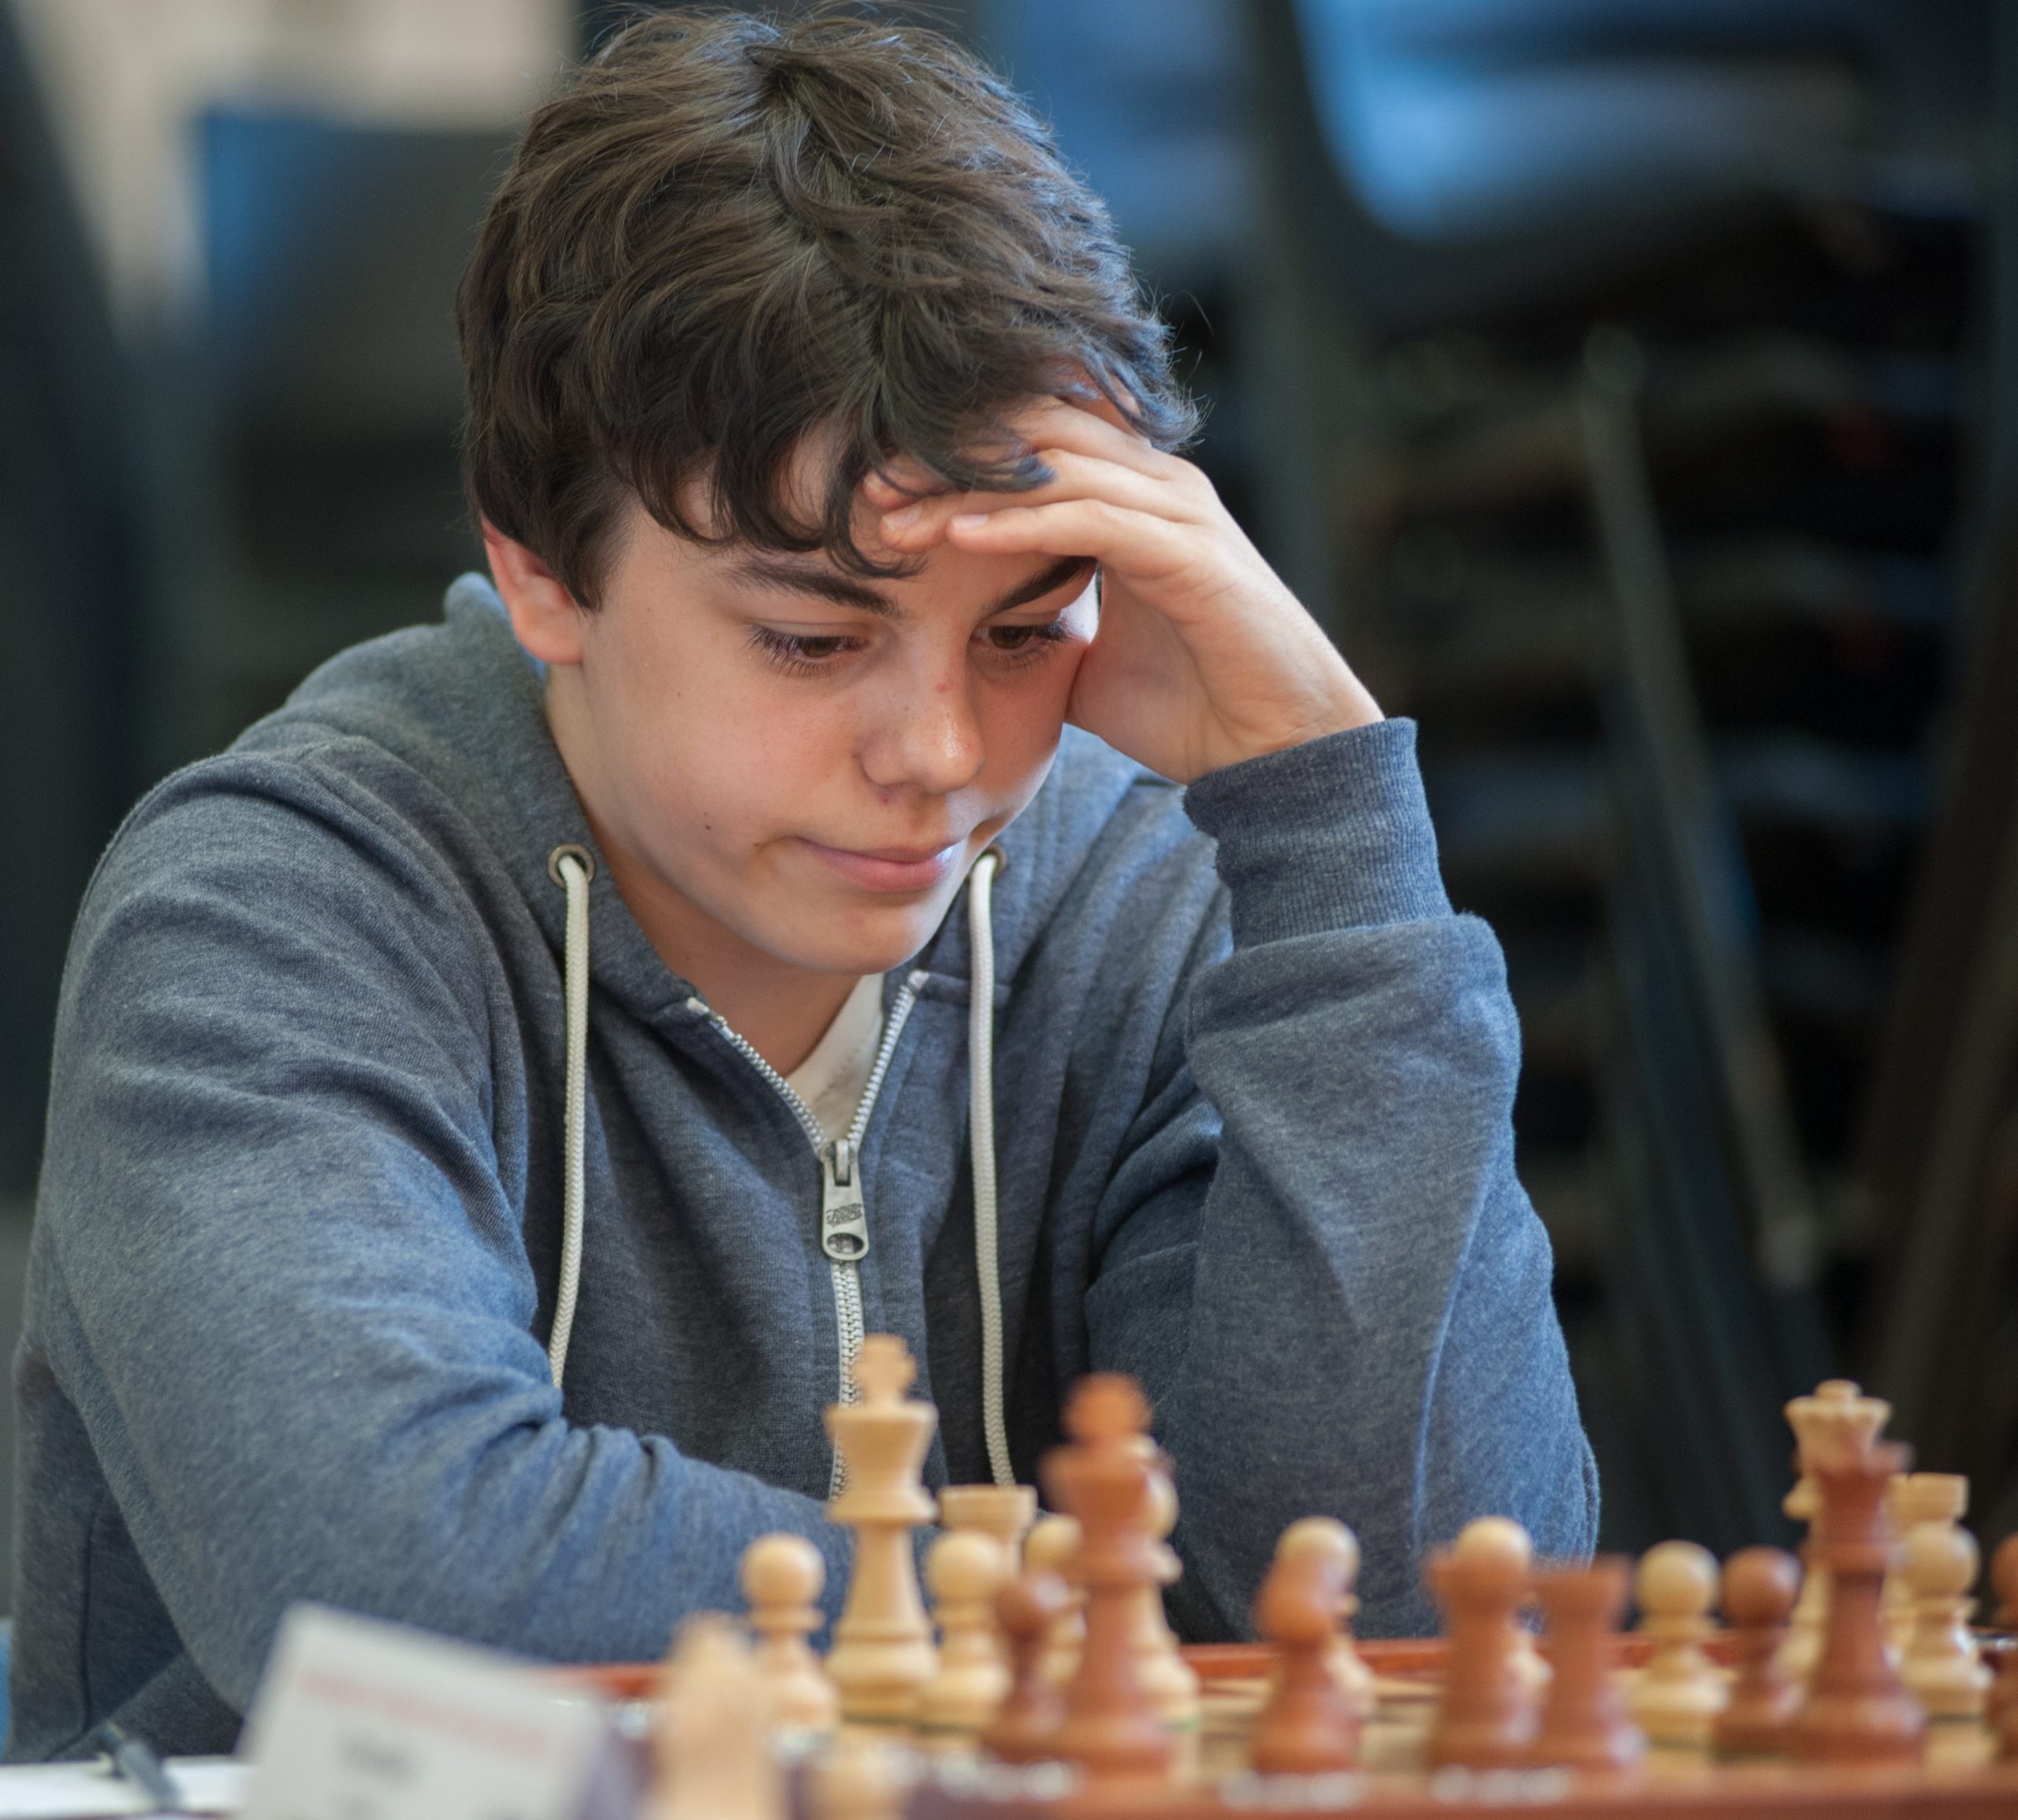 Adam C Taylor at the 2013 UK Chess Challenge Terafinal. Courtesy of John Upham Photography